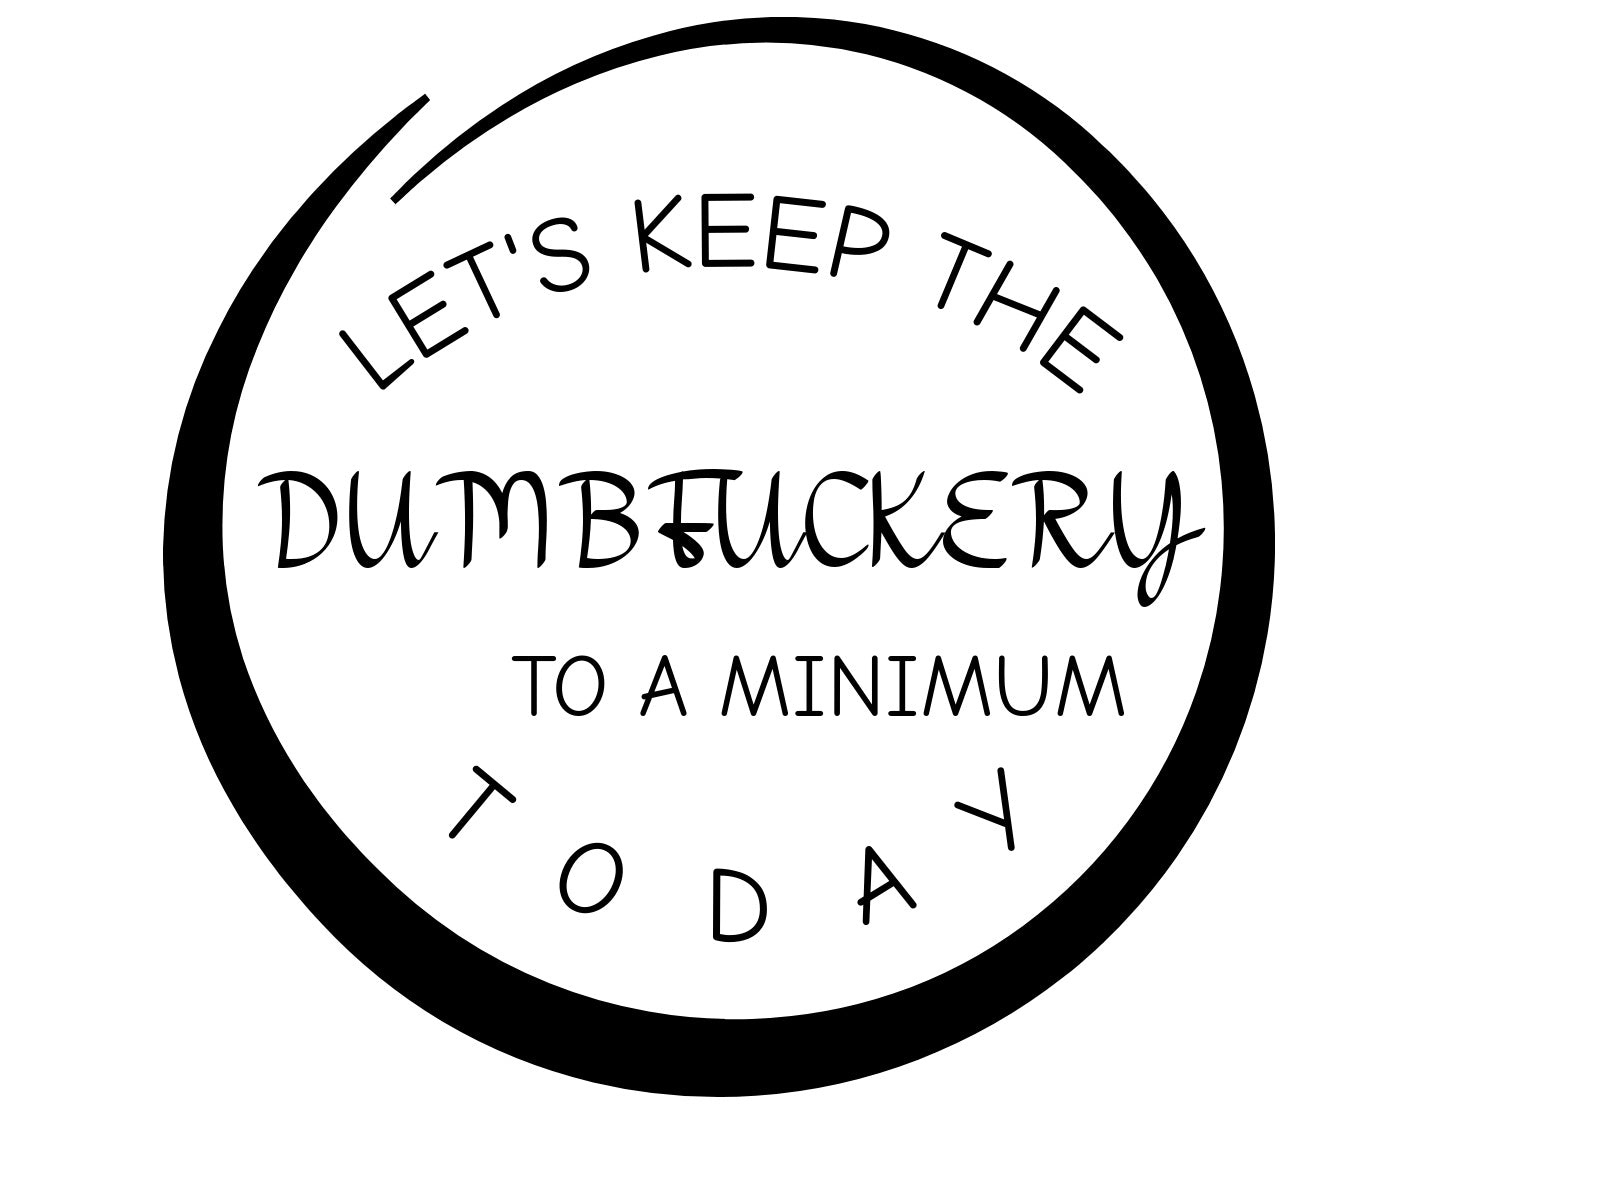 Let's Keep The Dumbfuckery To a Minimum Today.